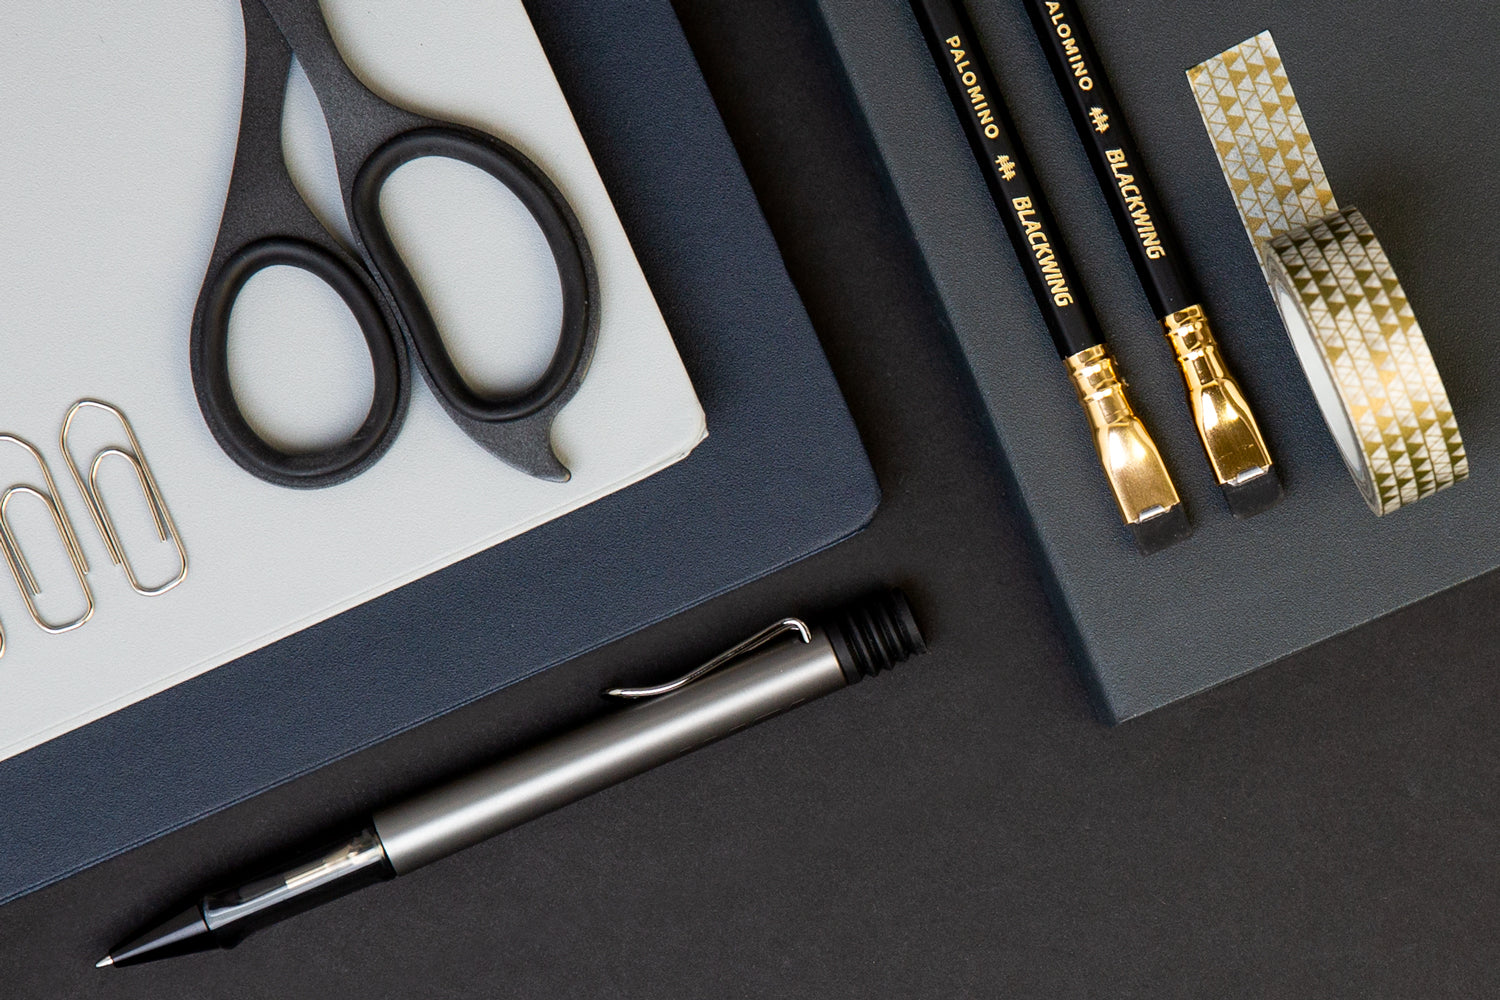 An array of dark colored desk accessories - black scissors, black pencils, a navy planner, and gold washi tape